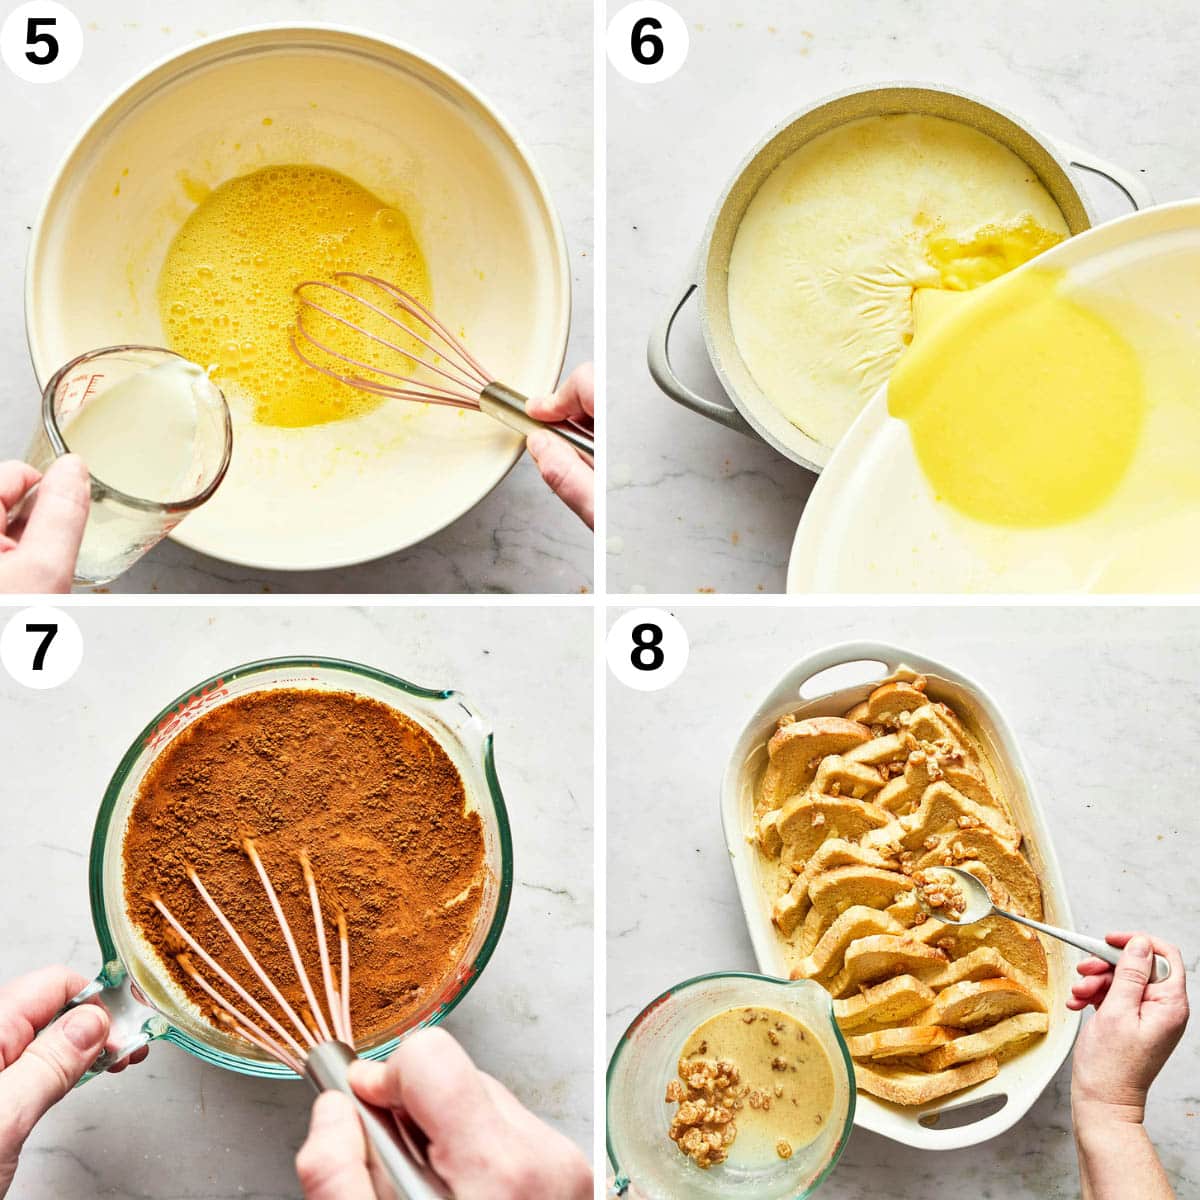 Pudding steps 5 to 8, mixing the custard and topping the bread.